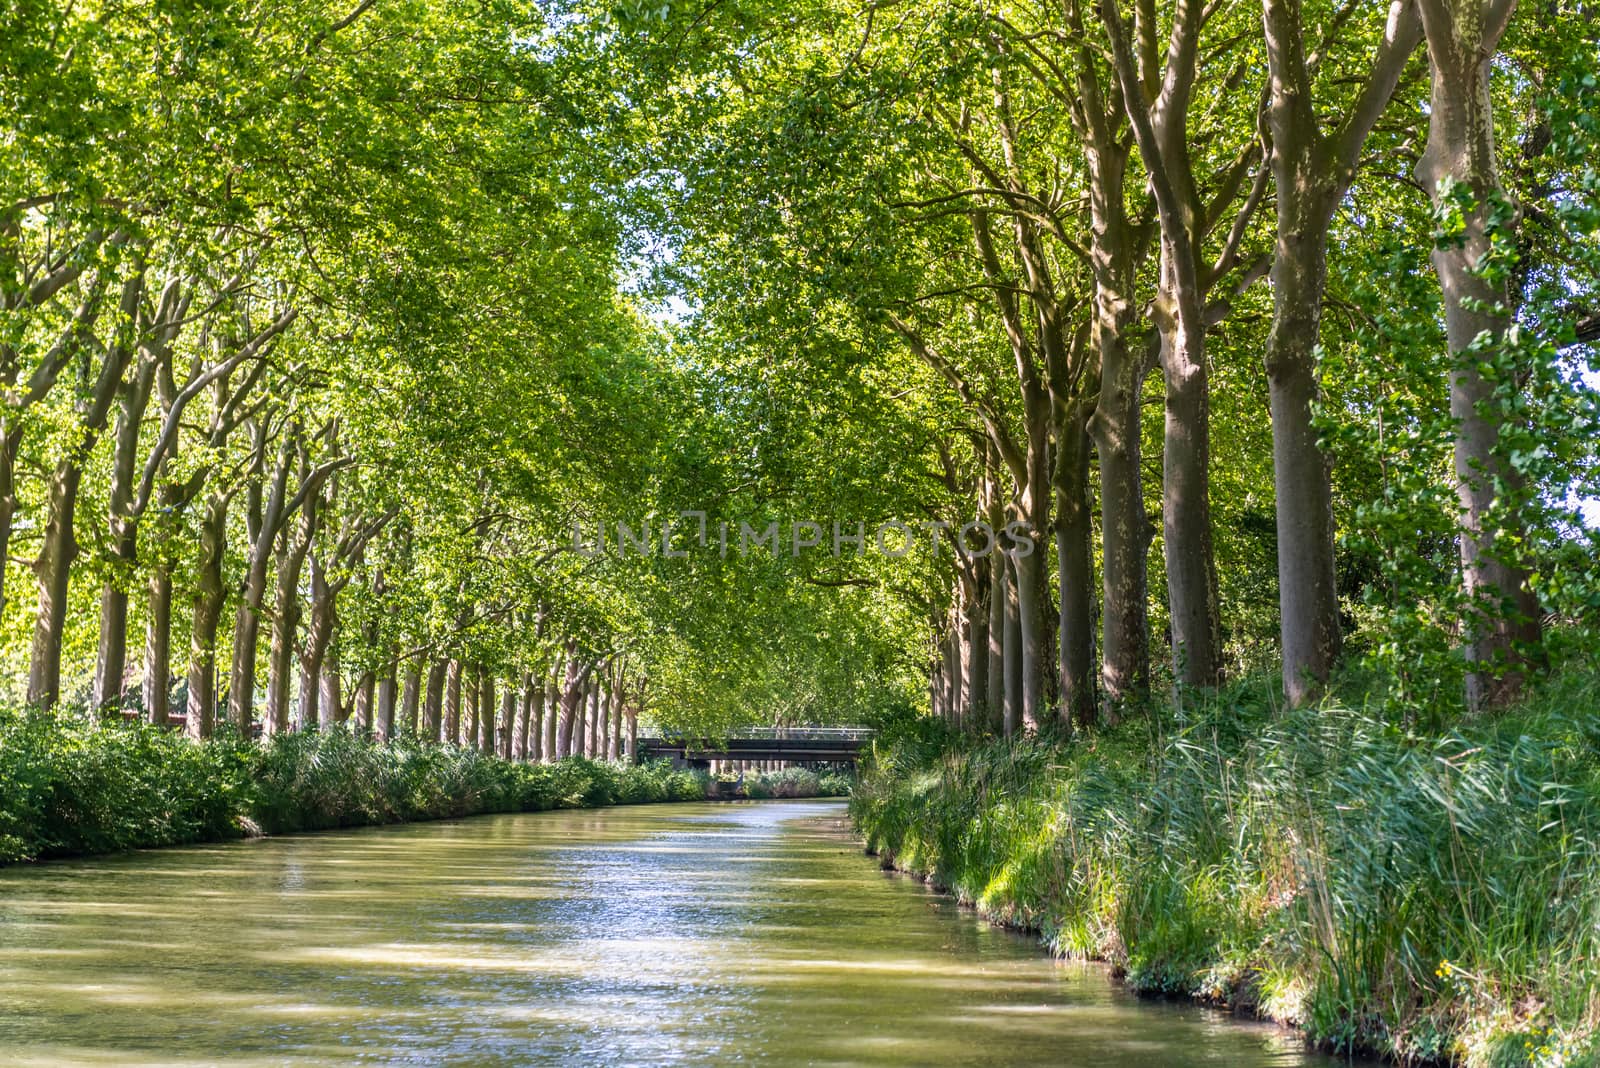 Toulouse,France - ummer look on Canal du Midi canal in Toulouse, southern Franc